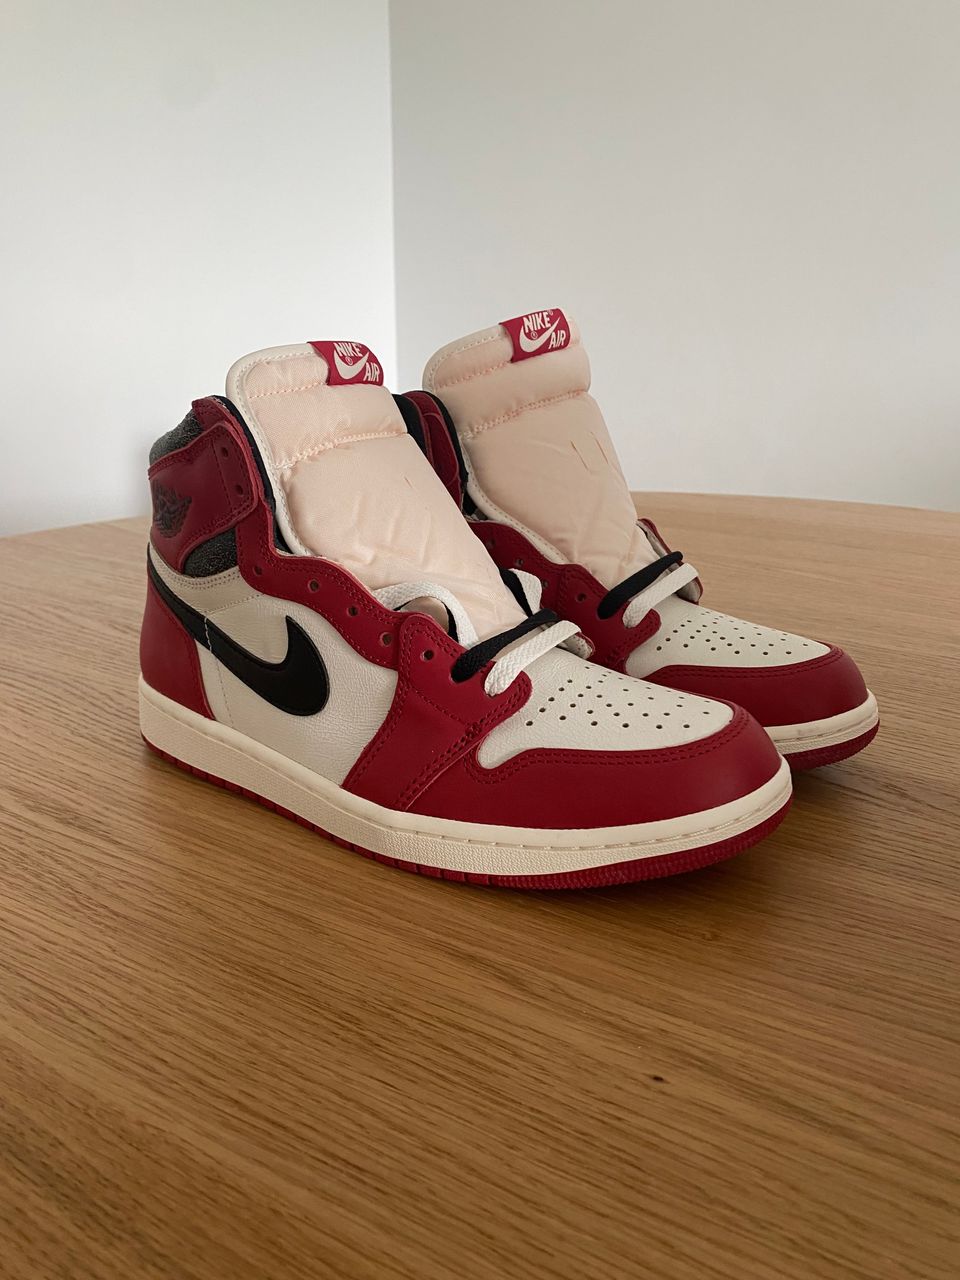 Nike jordan 1 high lost and found